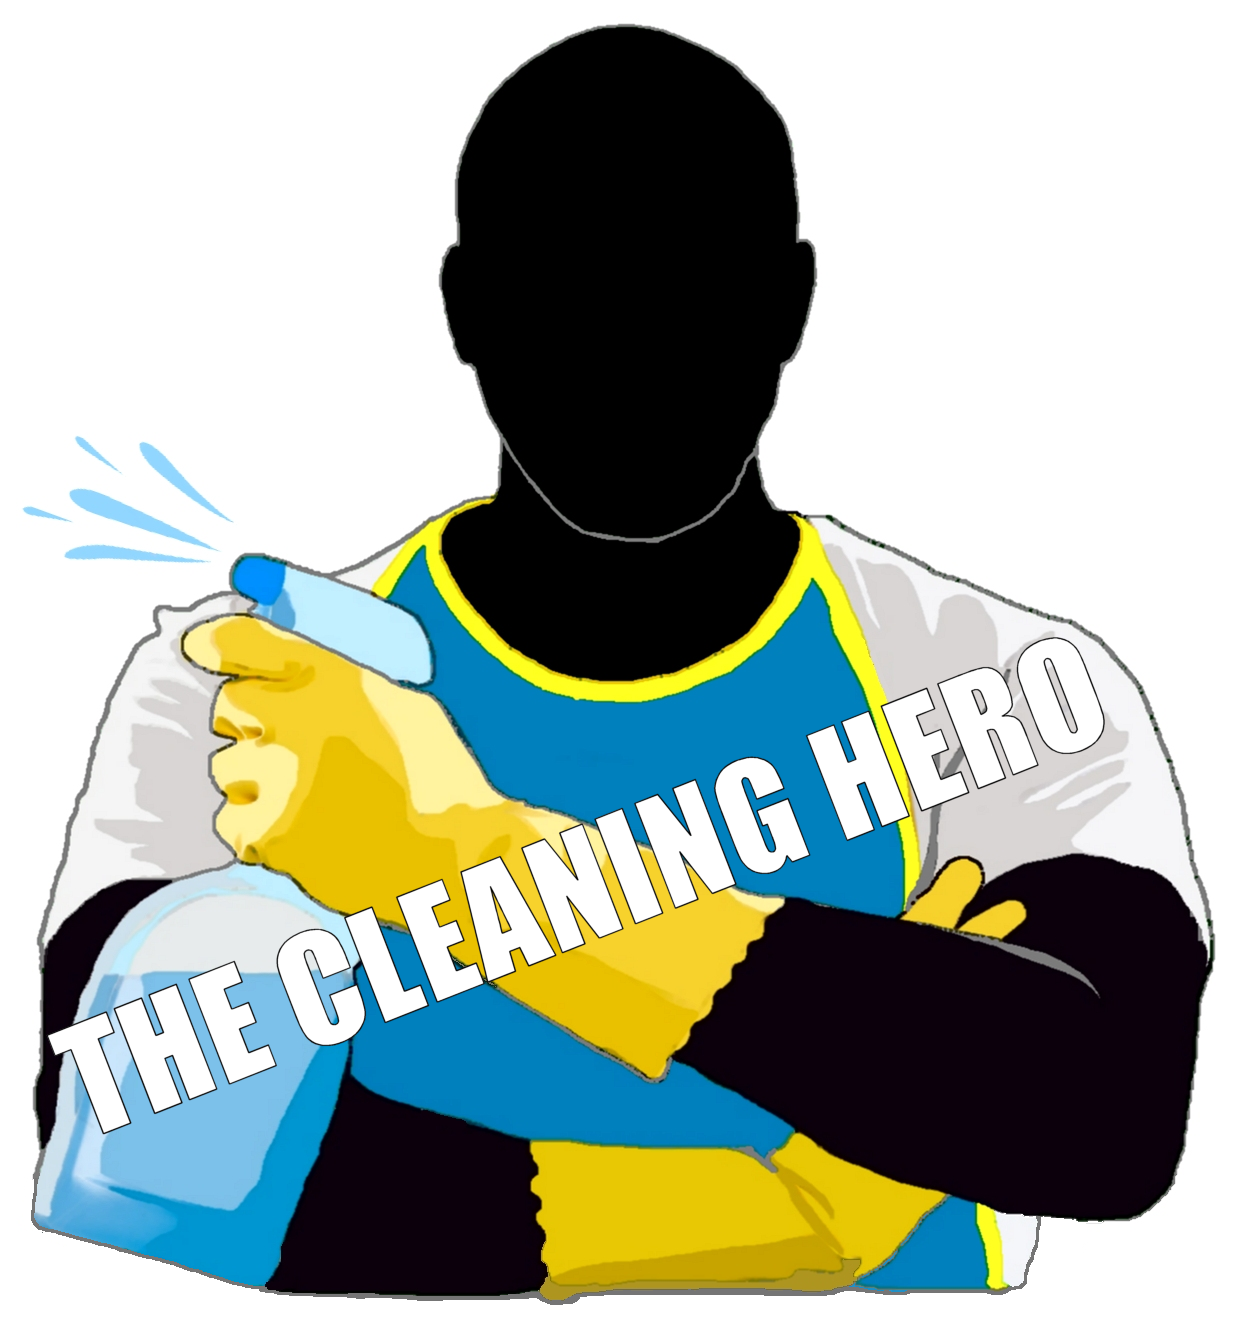 The Cleaning Hero